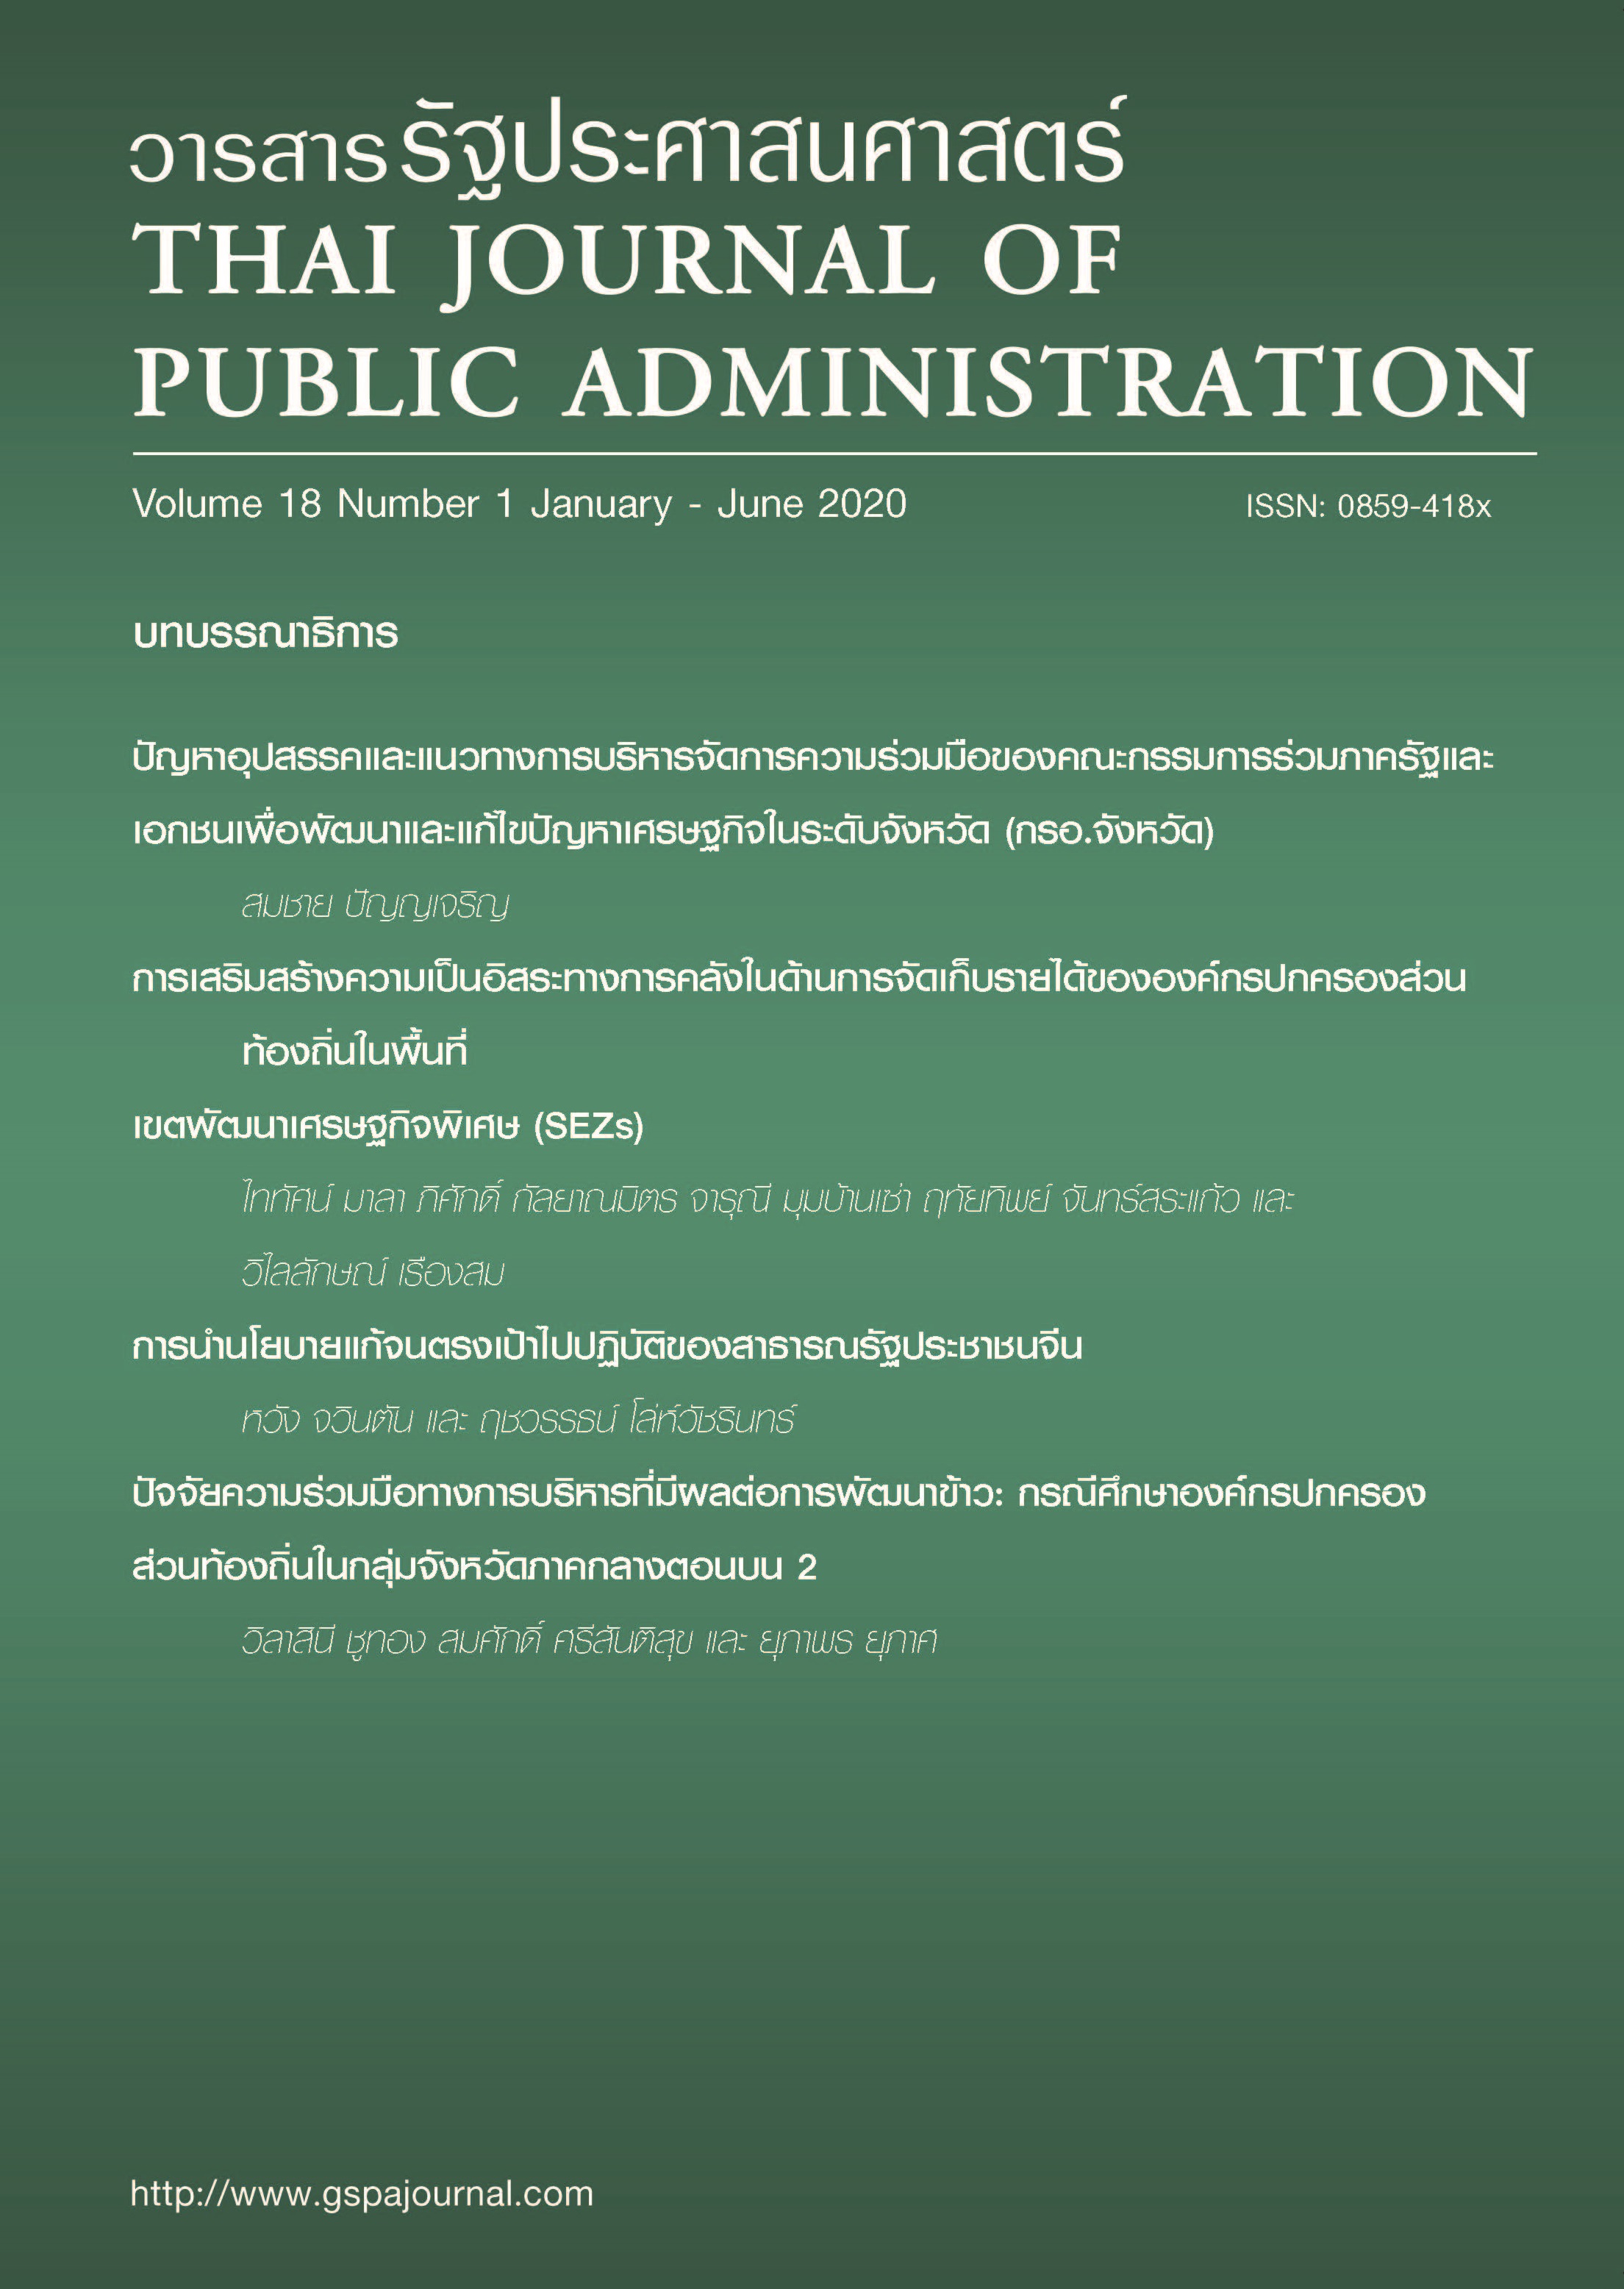 					View Vol. 18 No. 1 (2020): Thai Journal of Public Administration Volume 18 Number 1
				